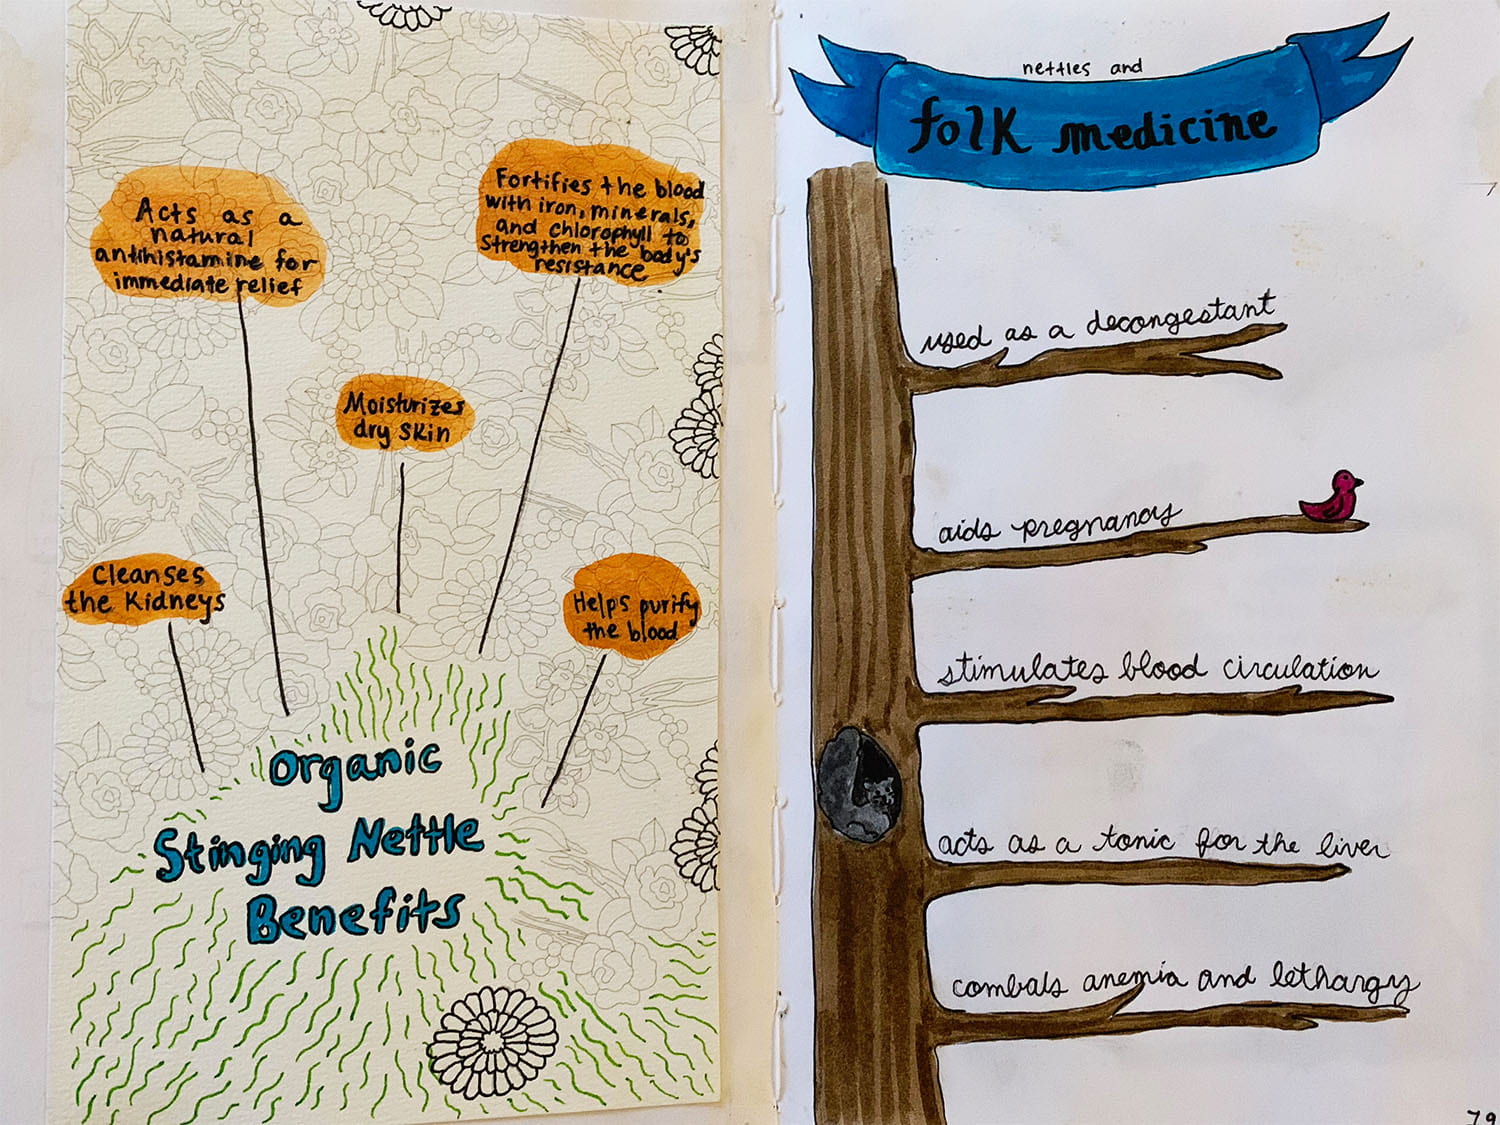 journal entry with illustrations about the benefits of stinging nettles, and what they're used for in folk medicine